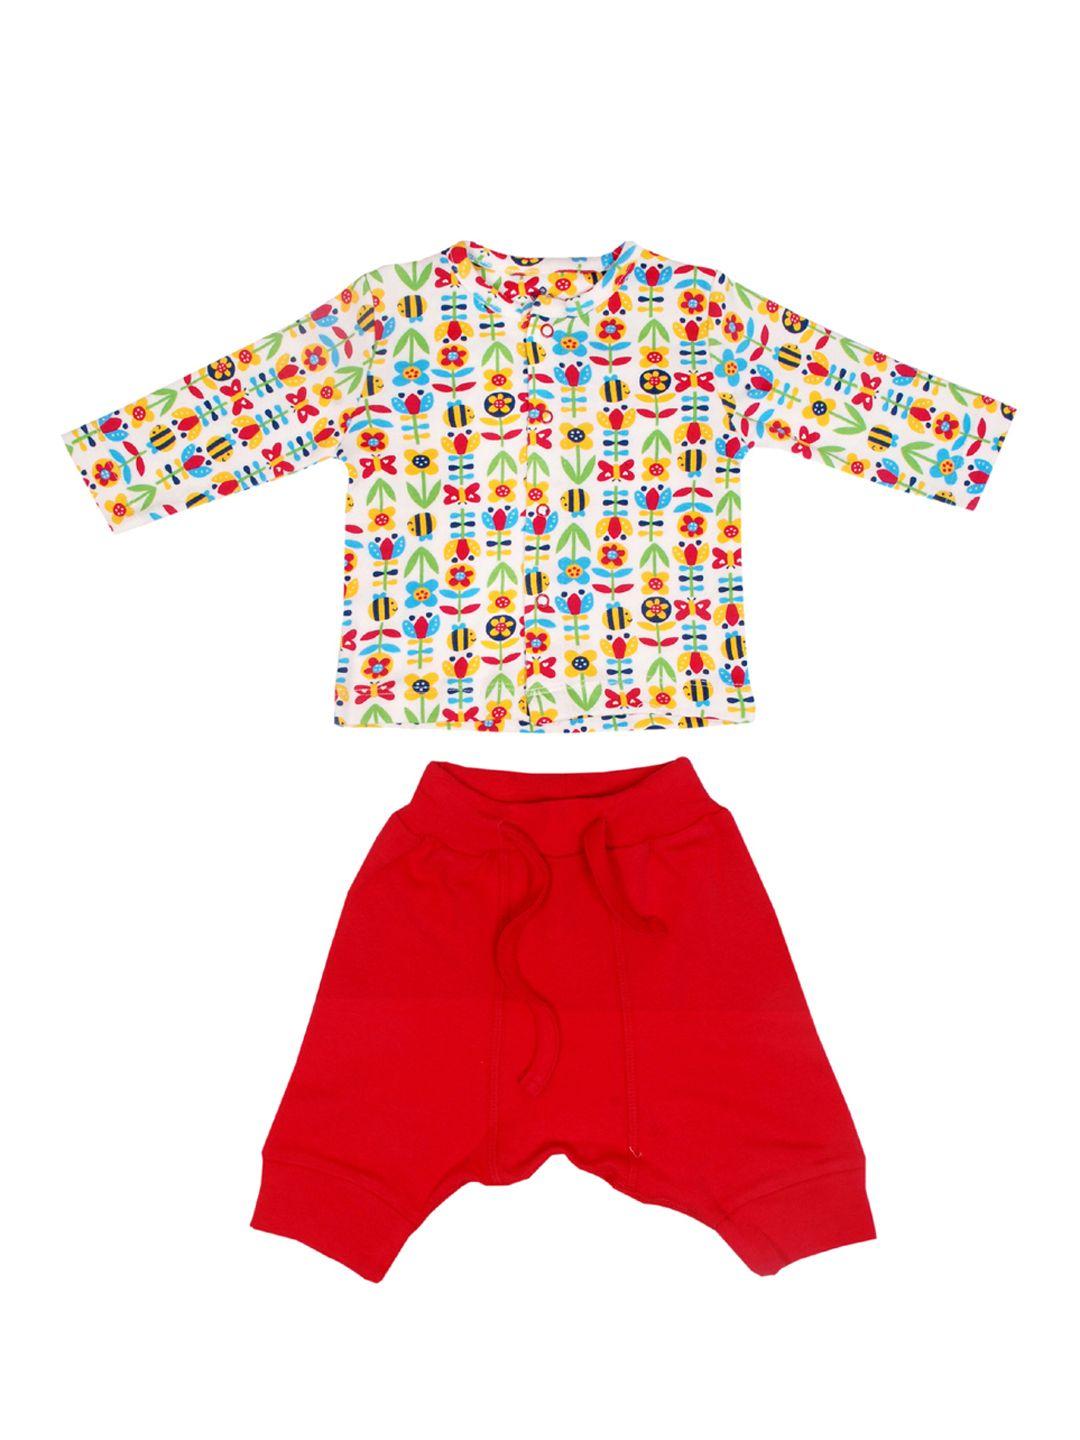 candy-cot-unisex-kids-red-printed-t-shirt-with-pyjamas-clothing-set